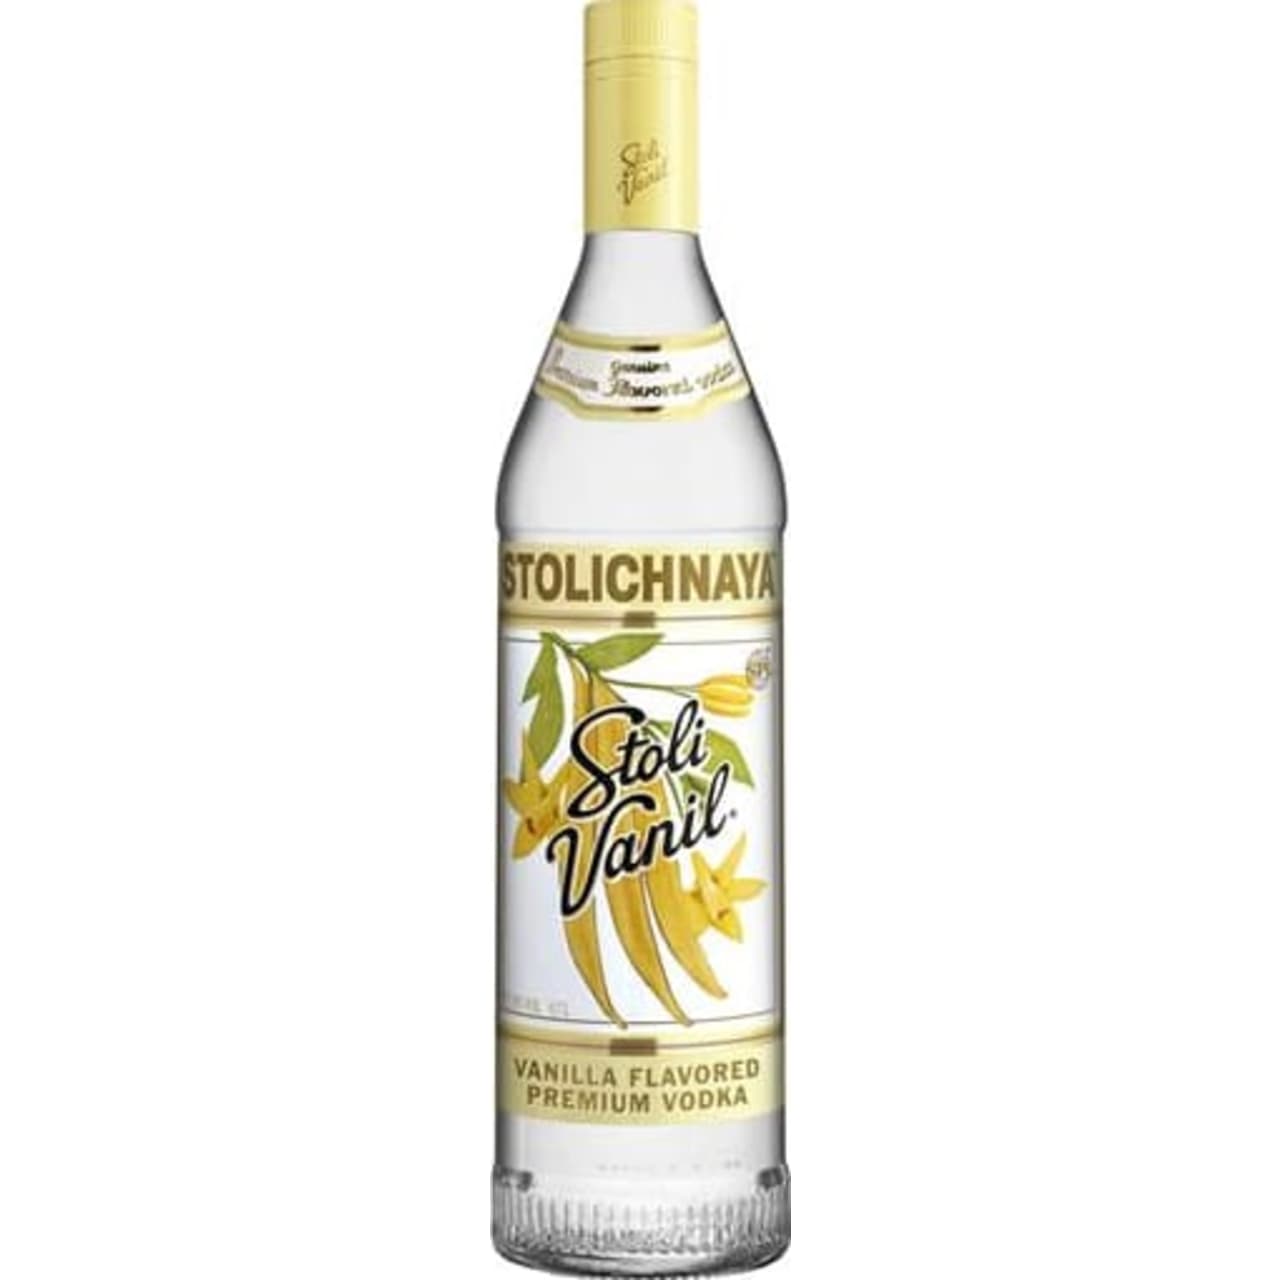 Stolichnaya Vanilla Vodka offers elegant aromas of vanilla pod, creme anglais and chocolate with undertones of toasted buttery grain, but without the heavy clouying sweetness of some vanilla vodkas.